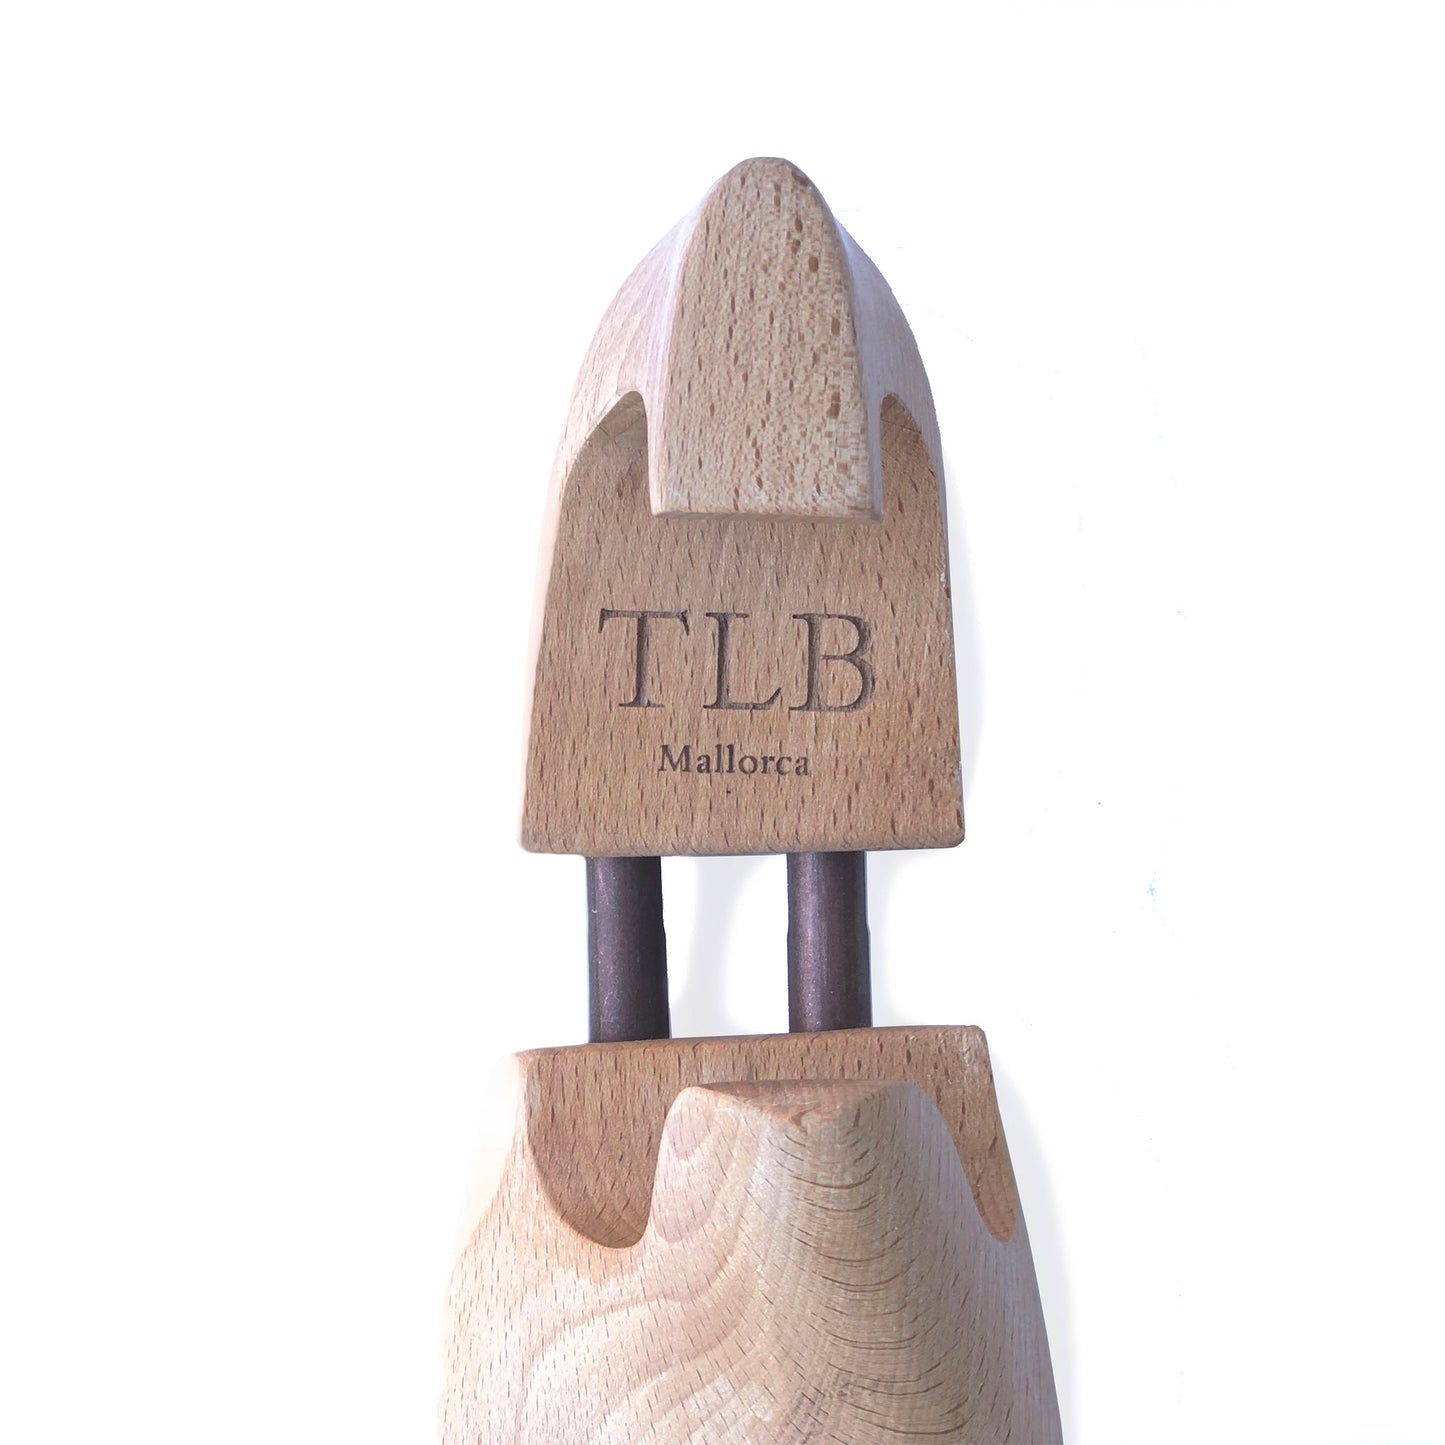 TLB Mallorca leather shoes 